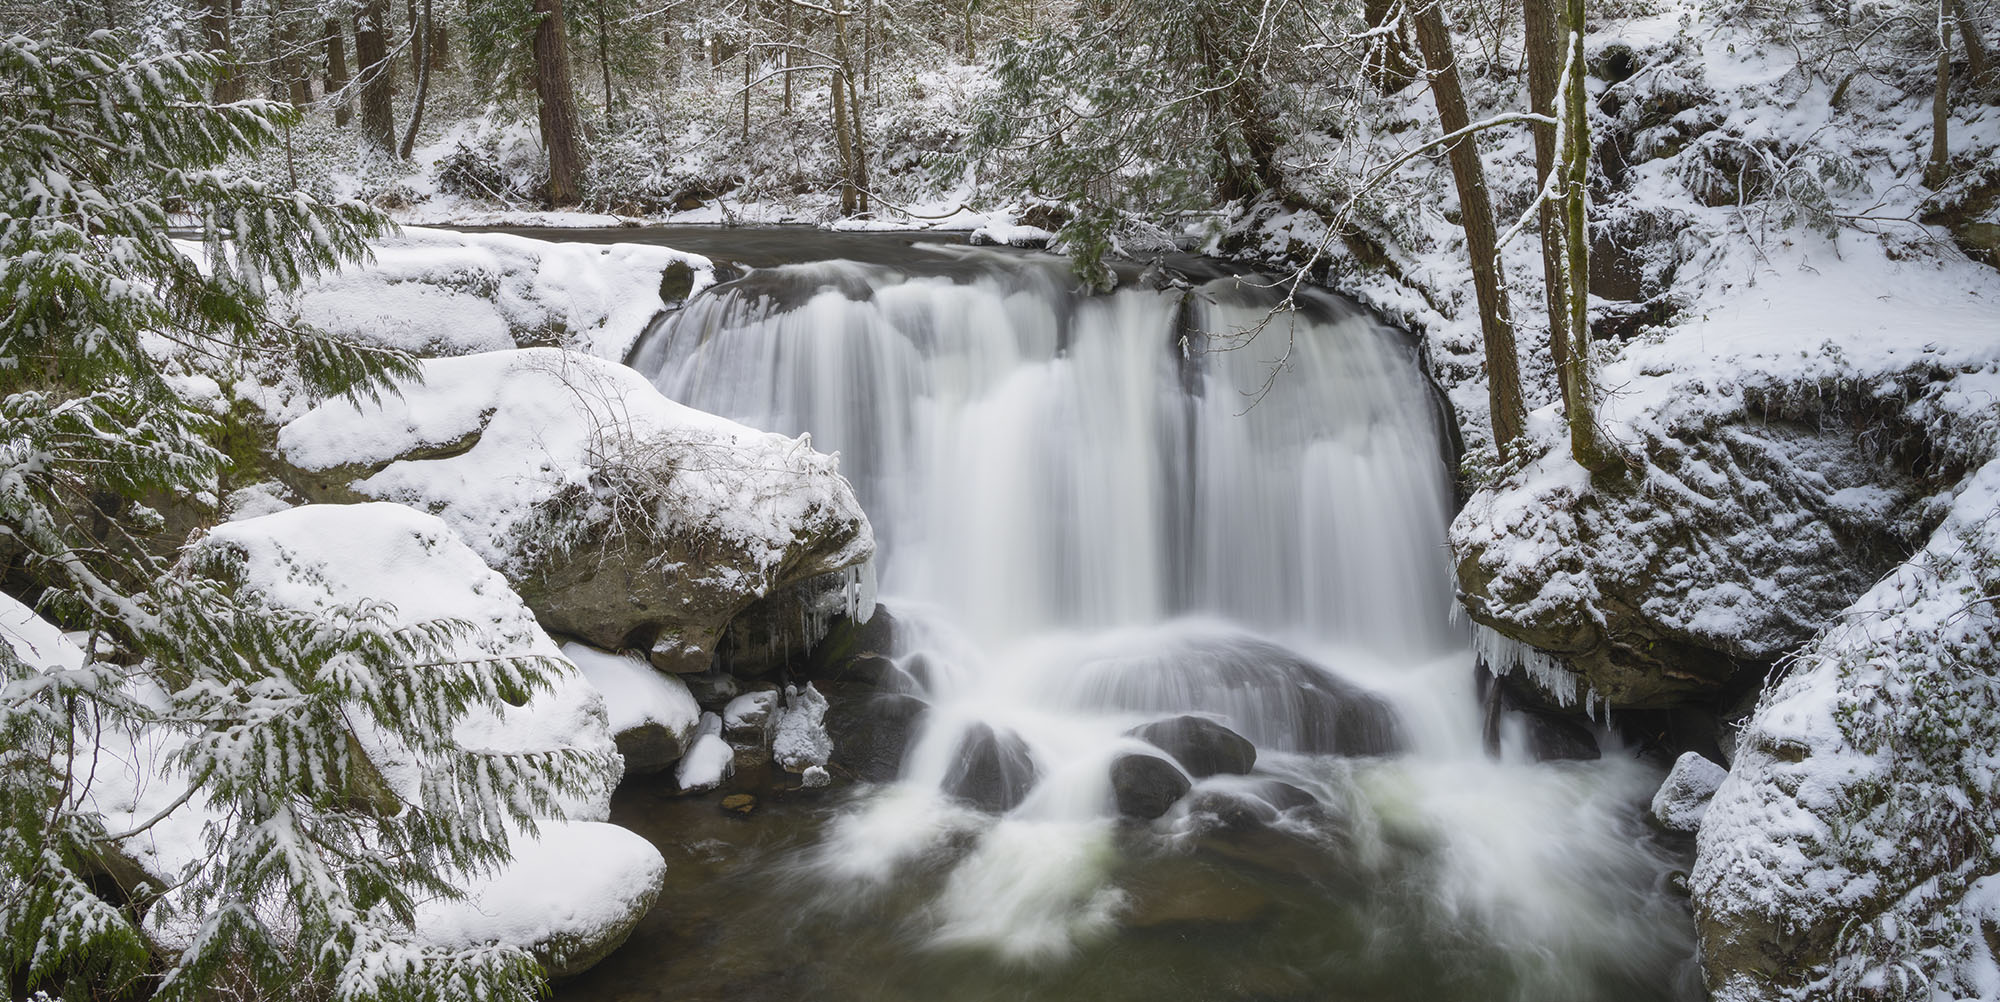 Whatcom Falls in Bellingham, WA in the winter with snow covering the ground.